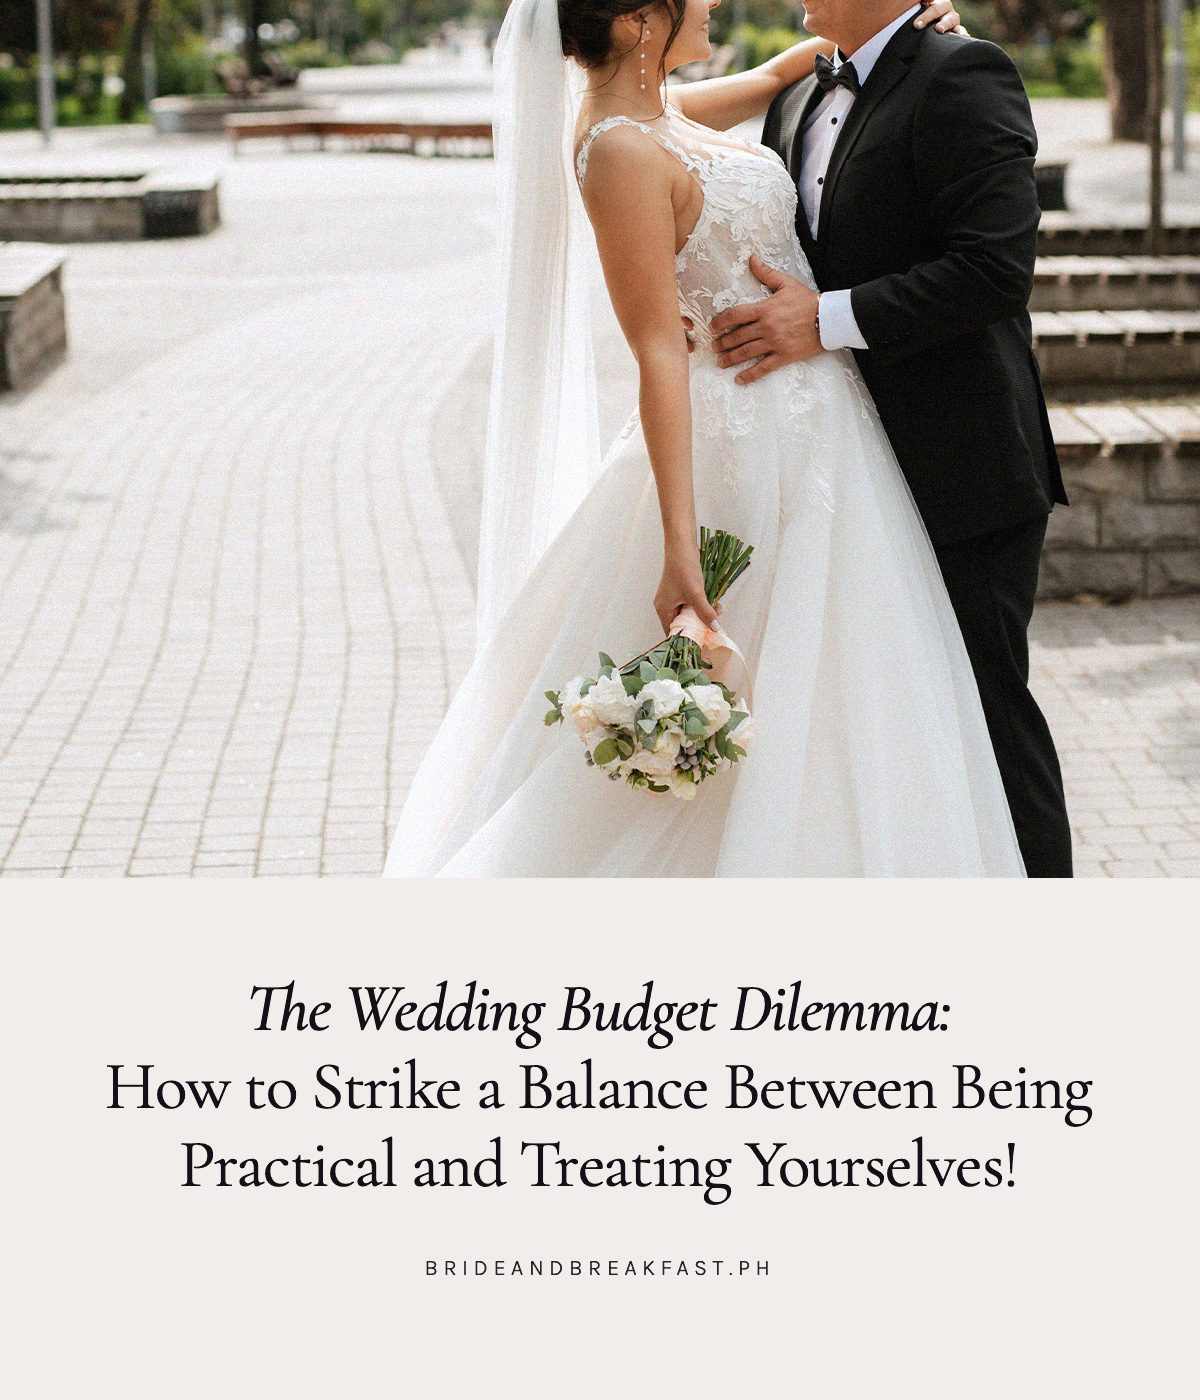 The Wedding Budget Dilemma: How to Strike a Balance Between Being Practical and Treating Yourselves!